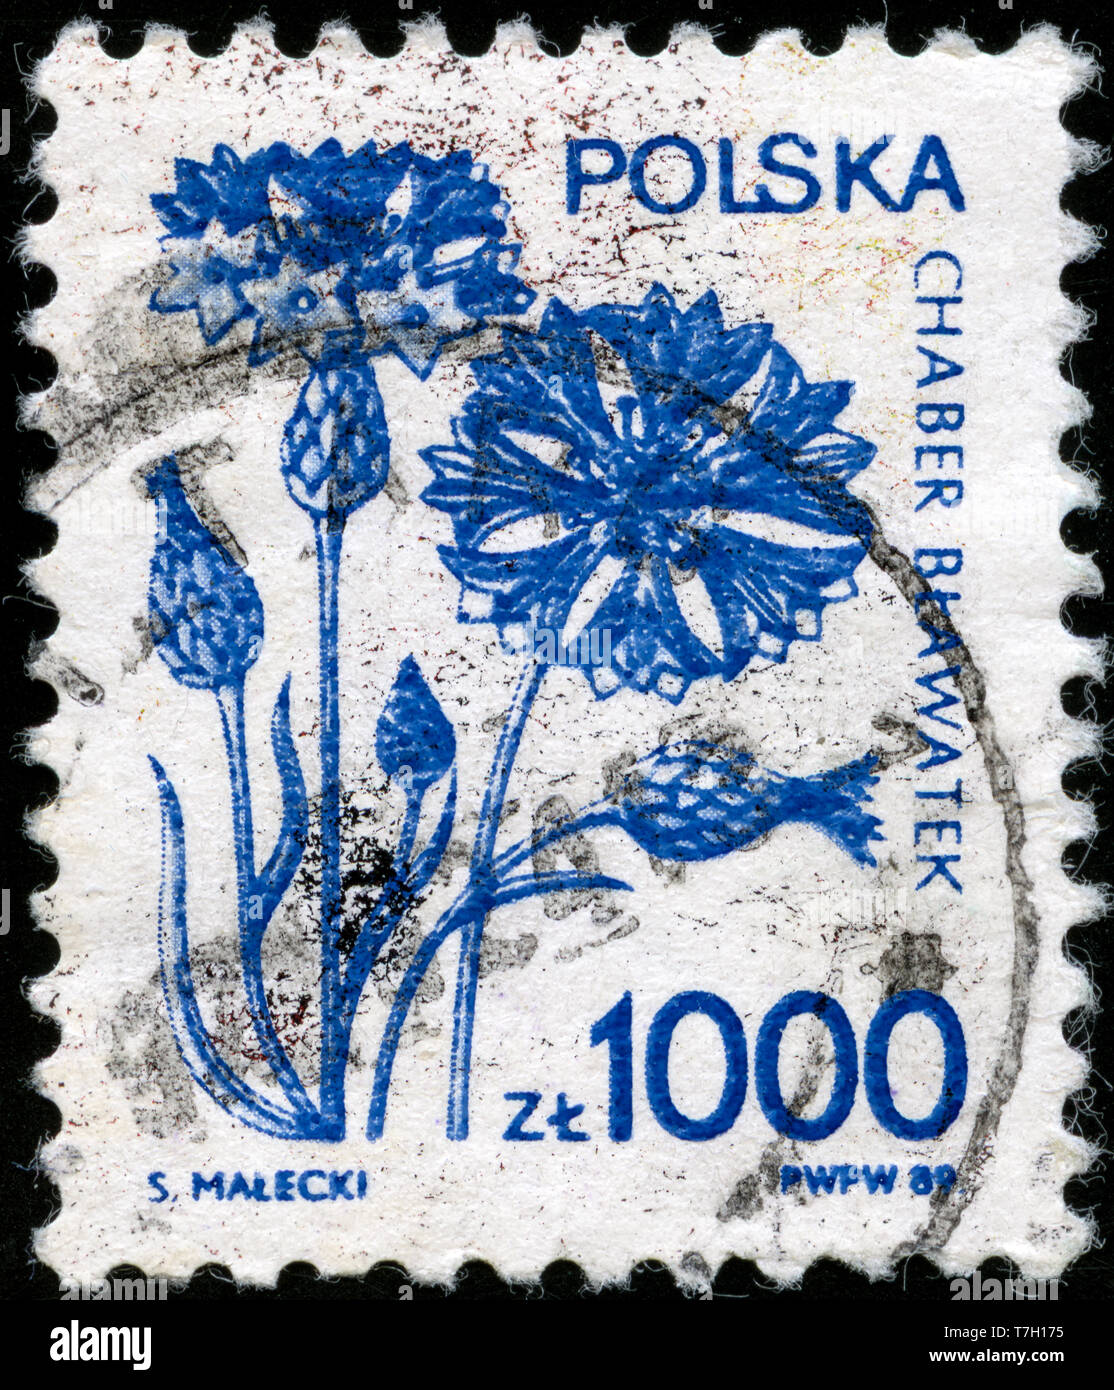 Postage stamp from Poland in the Medicinal Plants series issued in 1989 Stock Photo